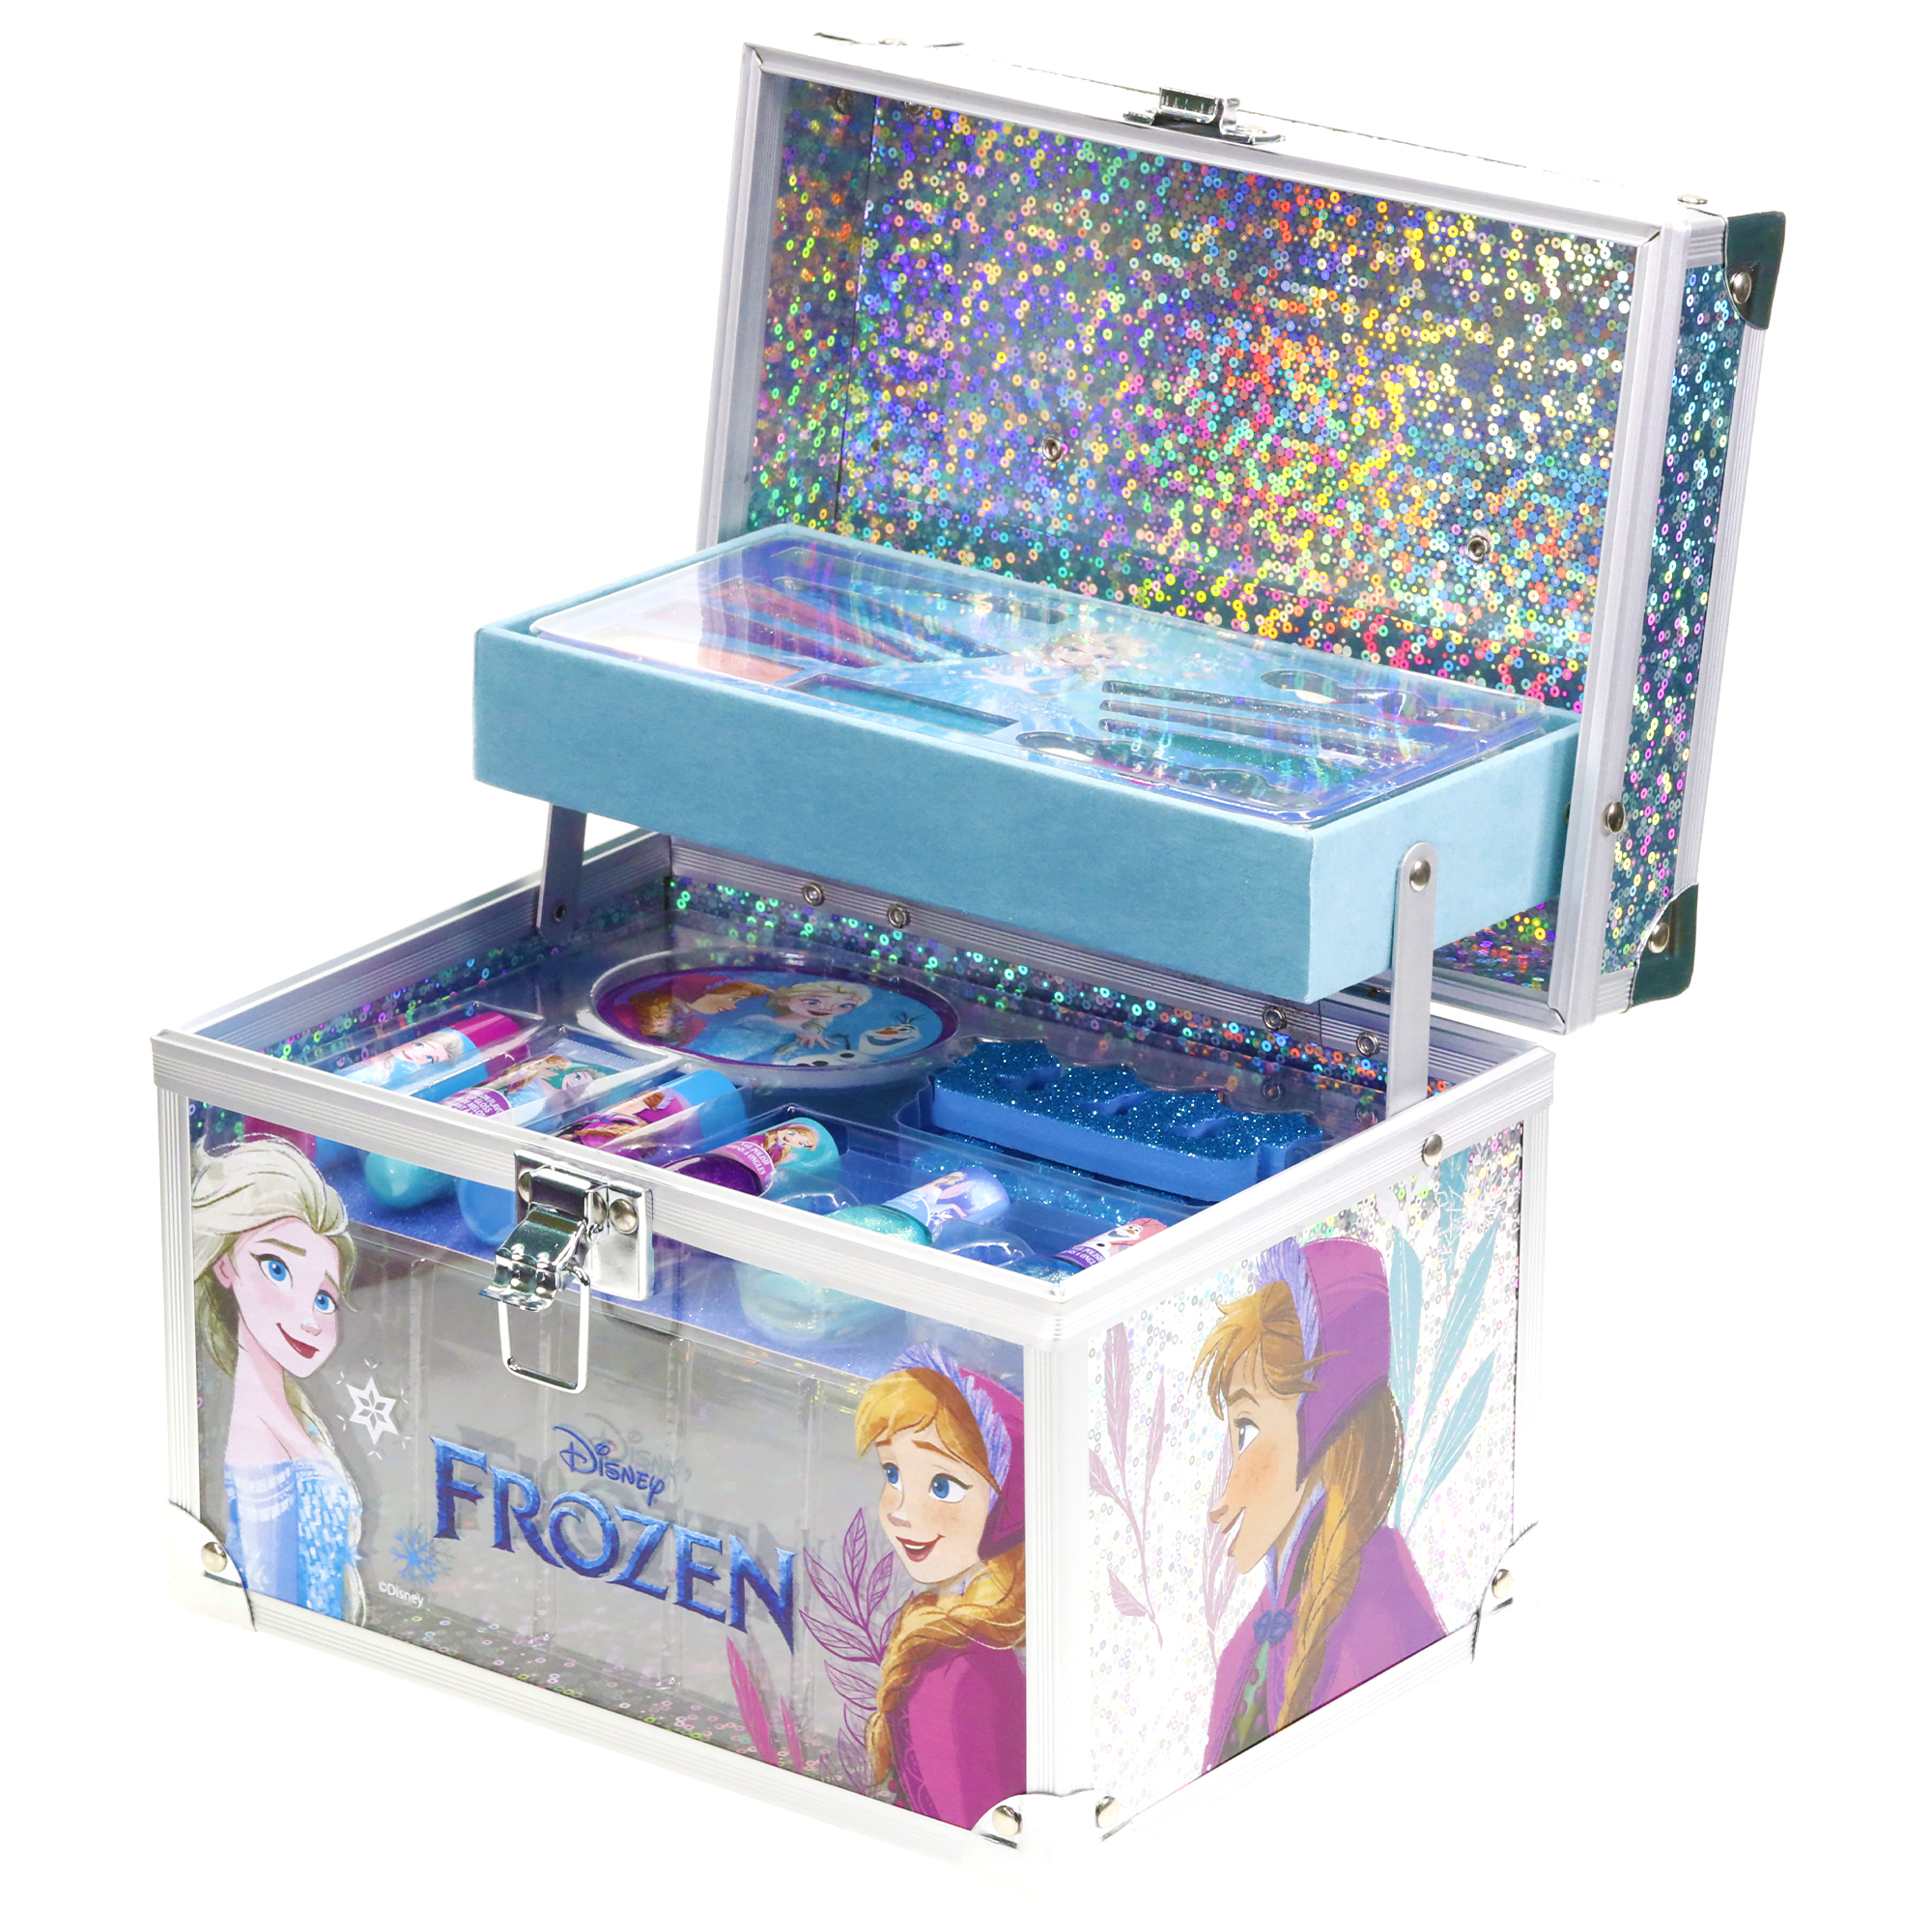 Disney Frozen Elsa and Anna Train Case Pretend Play Cosmetic Set- Kids Beauty, Toy, Gift for Girls, Ages 3+ by Townley Girl - image 1 of 13